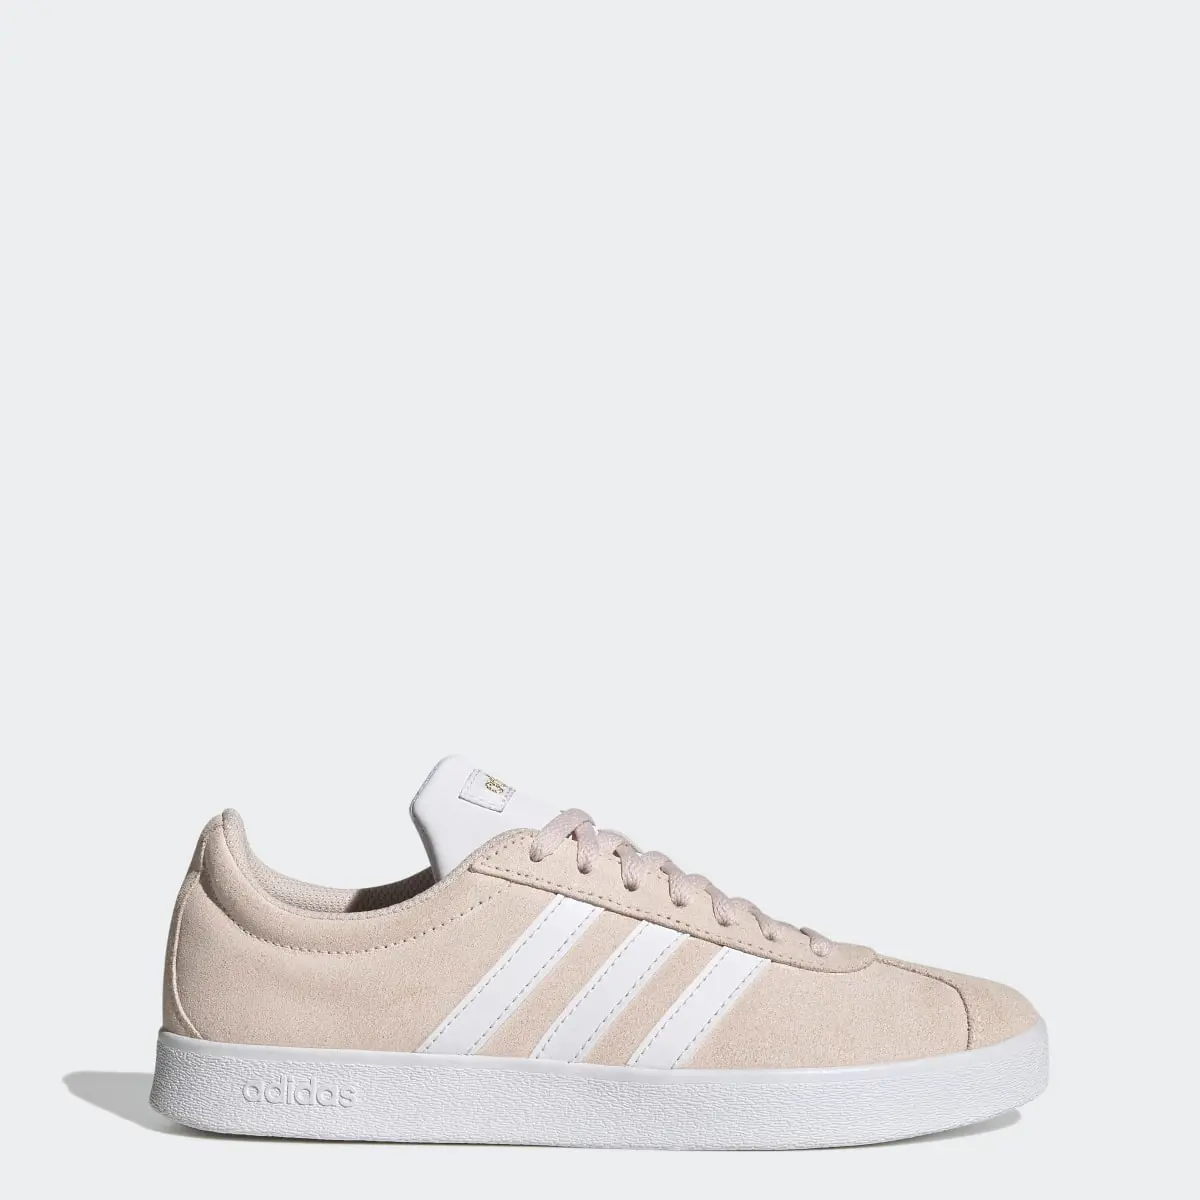 Adidas VL Court 2.0 Suede Shoes. 1